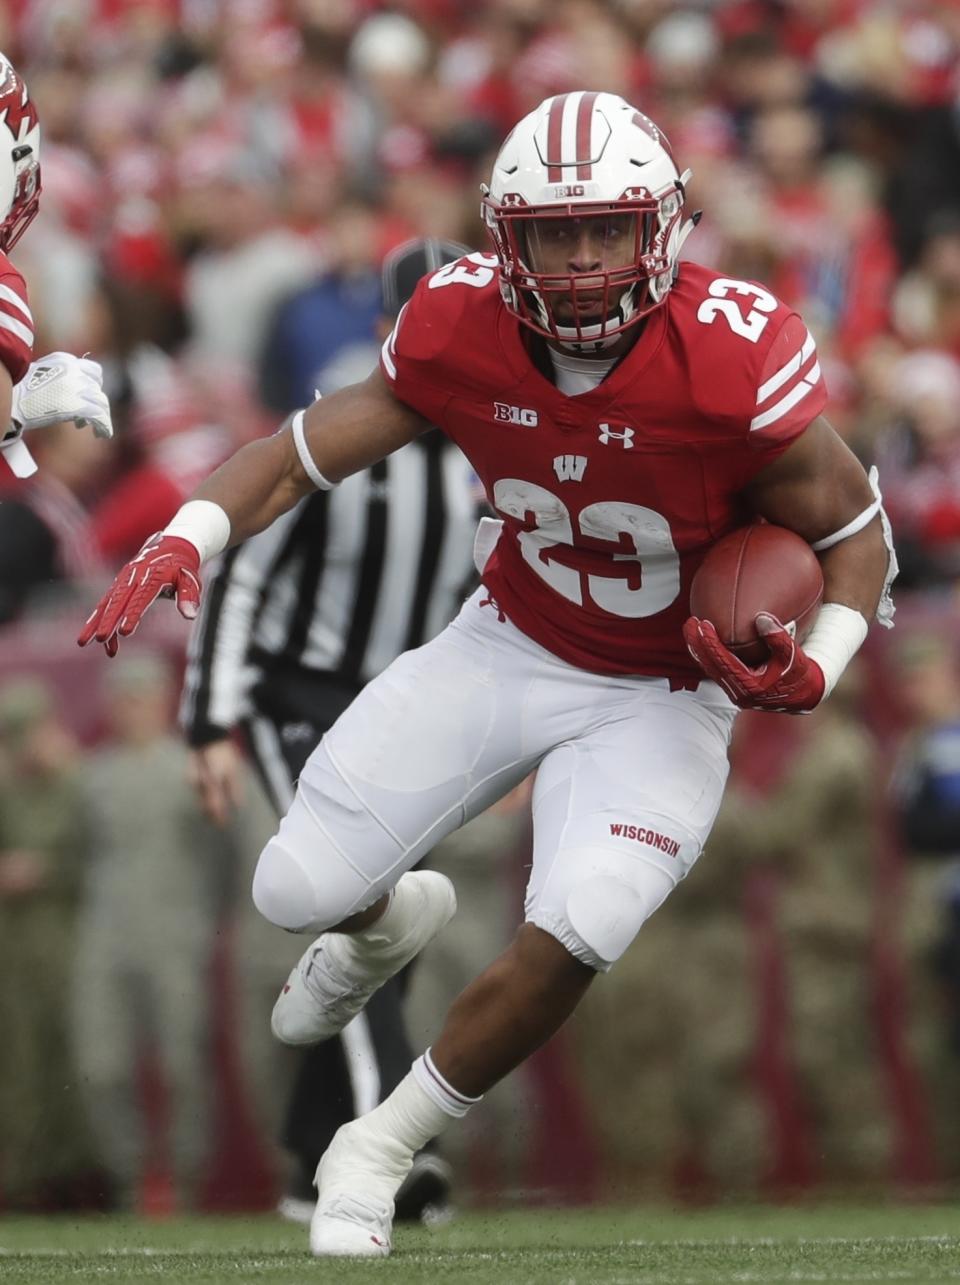 FILE - In this Nov. 3, 2018, file photo, Wisconsin's Jonathan Taylor runs during the first half against Rutgers, in Madison, Wis. Taylor was named to the 2018 AP All-America NCAA college football team, Monday, Dec. 10, 2018. (AP Photo/Morry Gash, File)